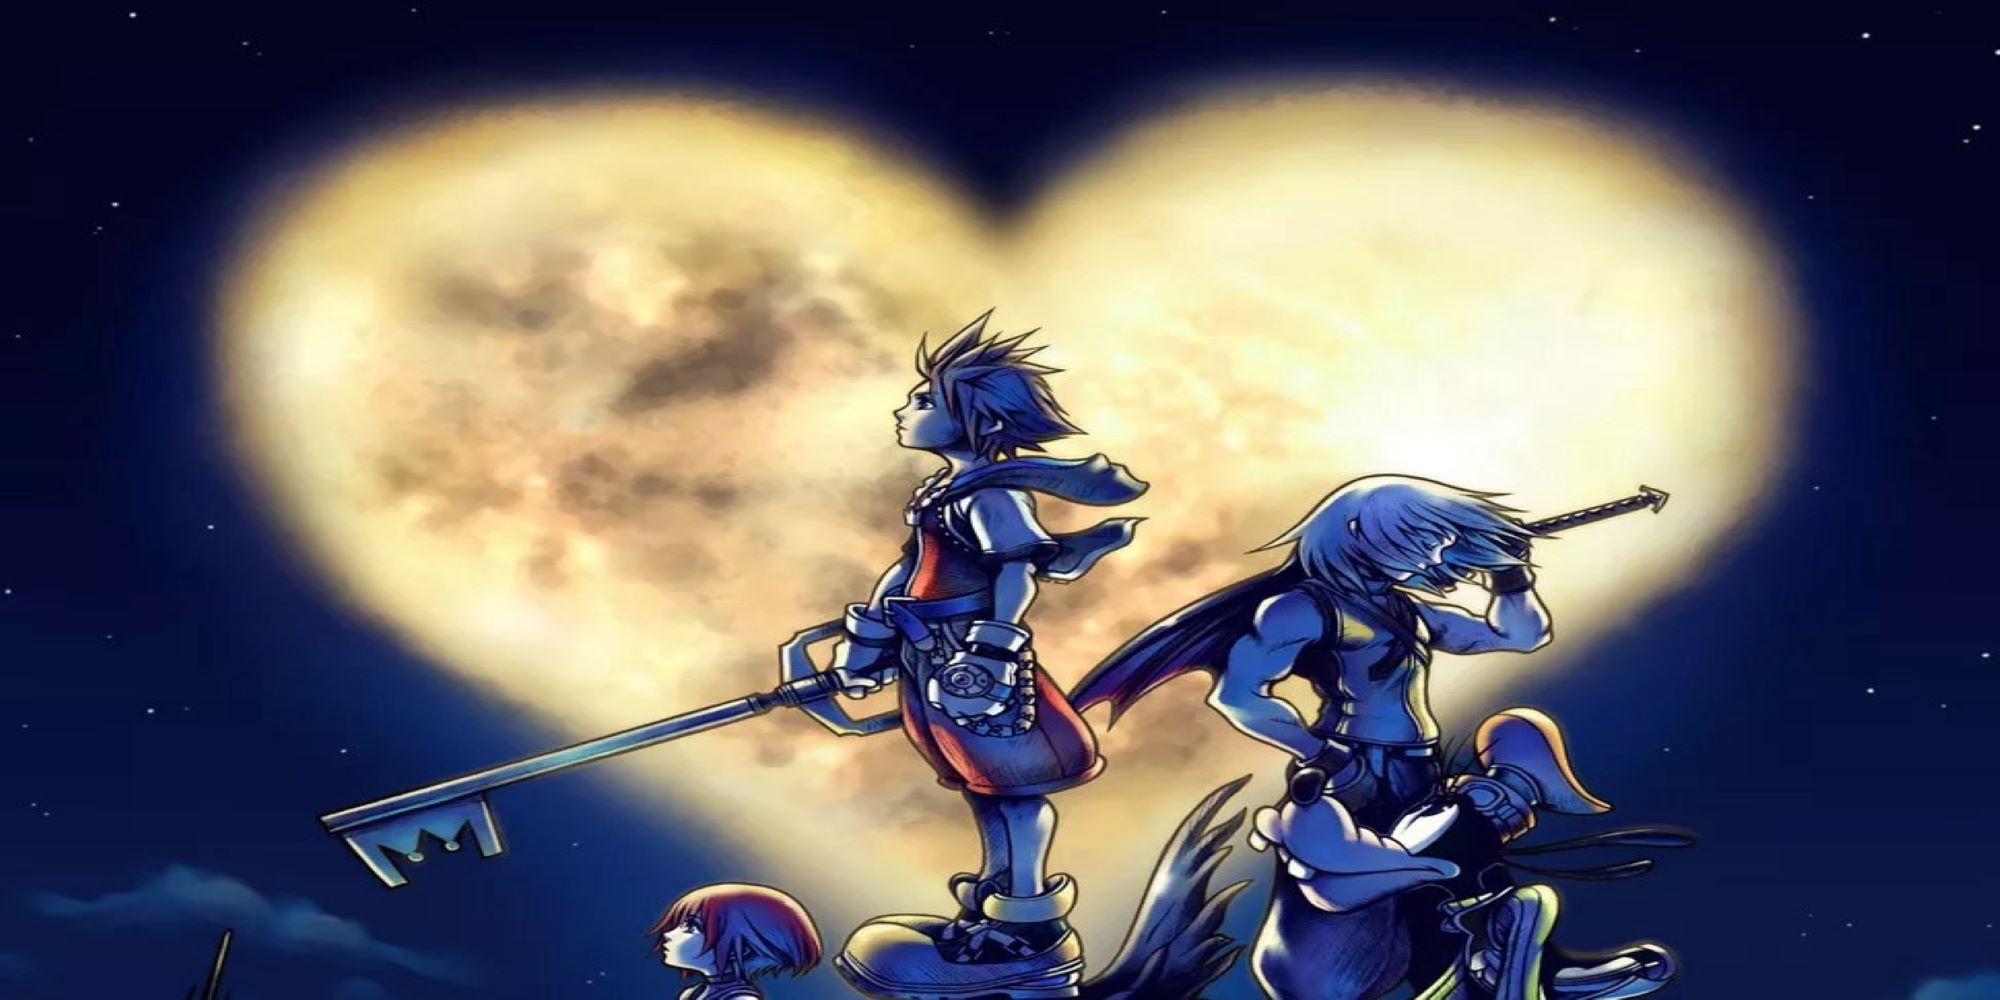 Feature art from Kingdom Hearts showing Sora and Riku holding keyblades against a heart-shaped moon in the background